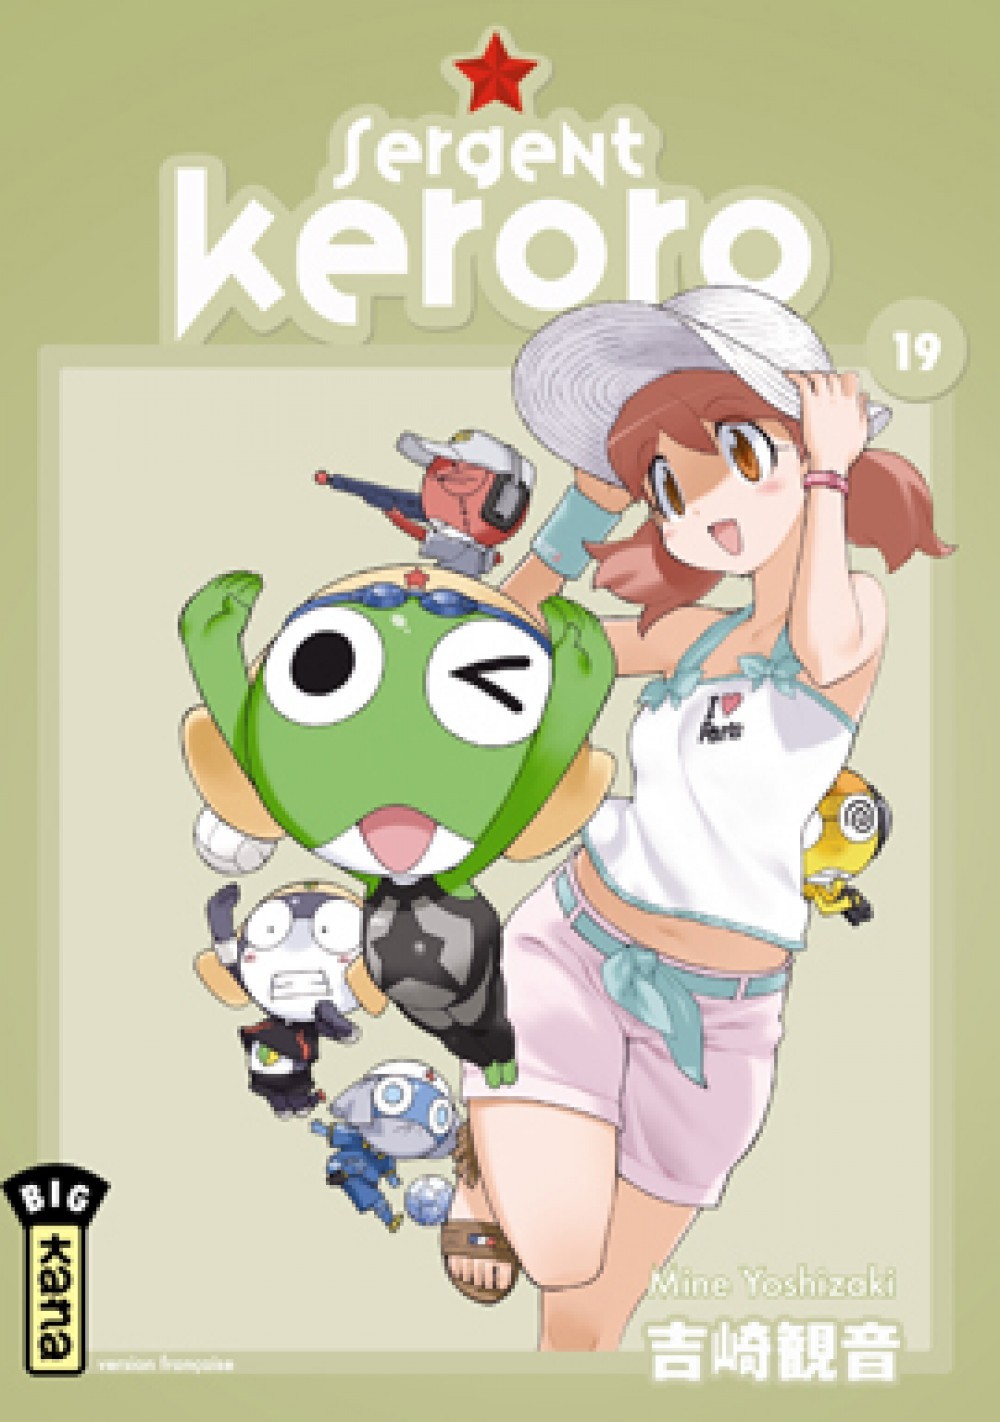 Sergent Keroro - Tome 19 (9782505011750-front-cover)